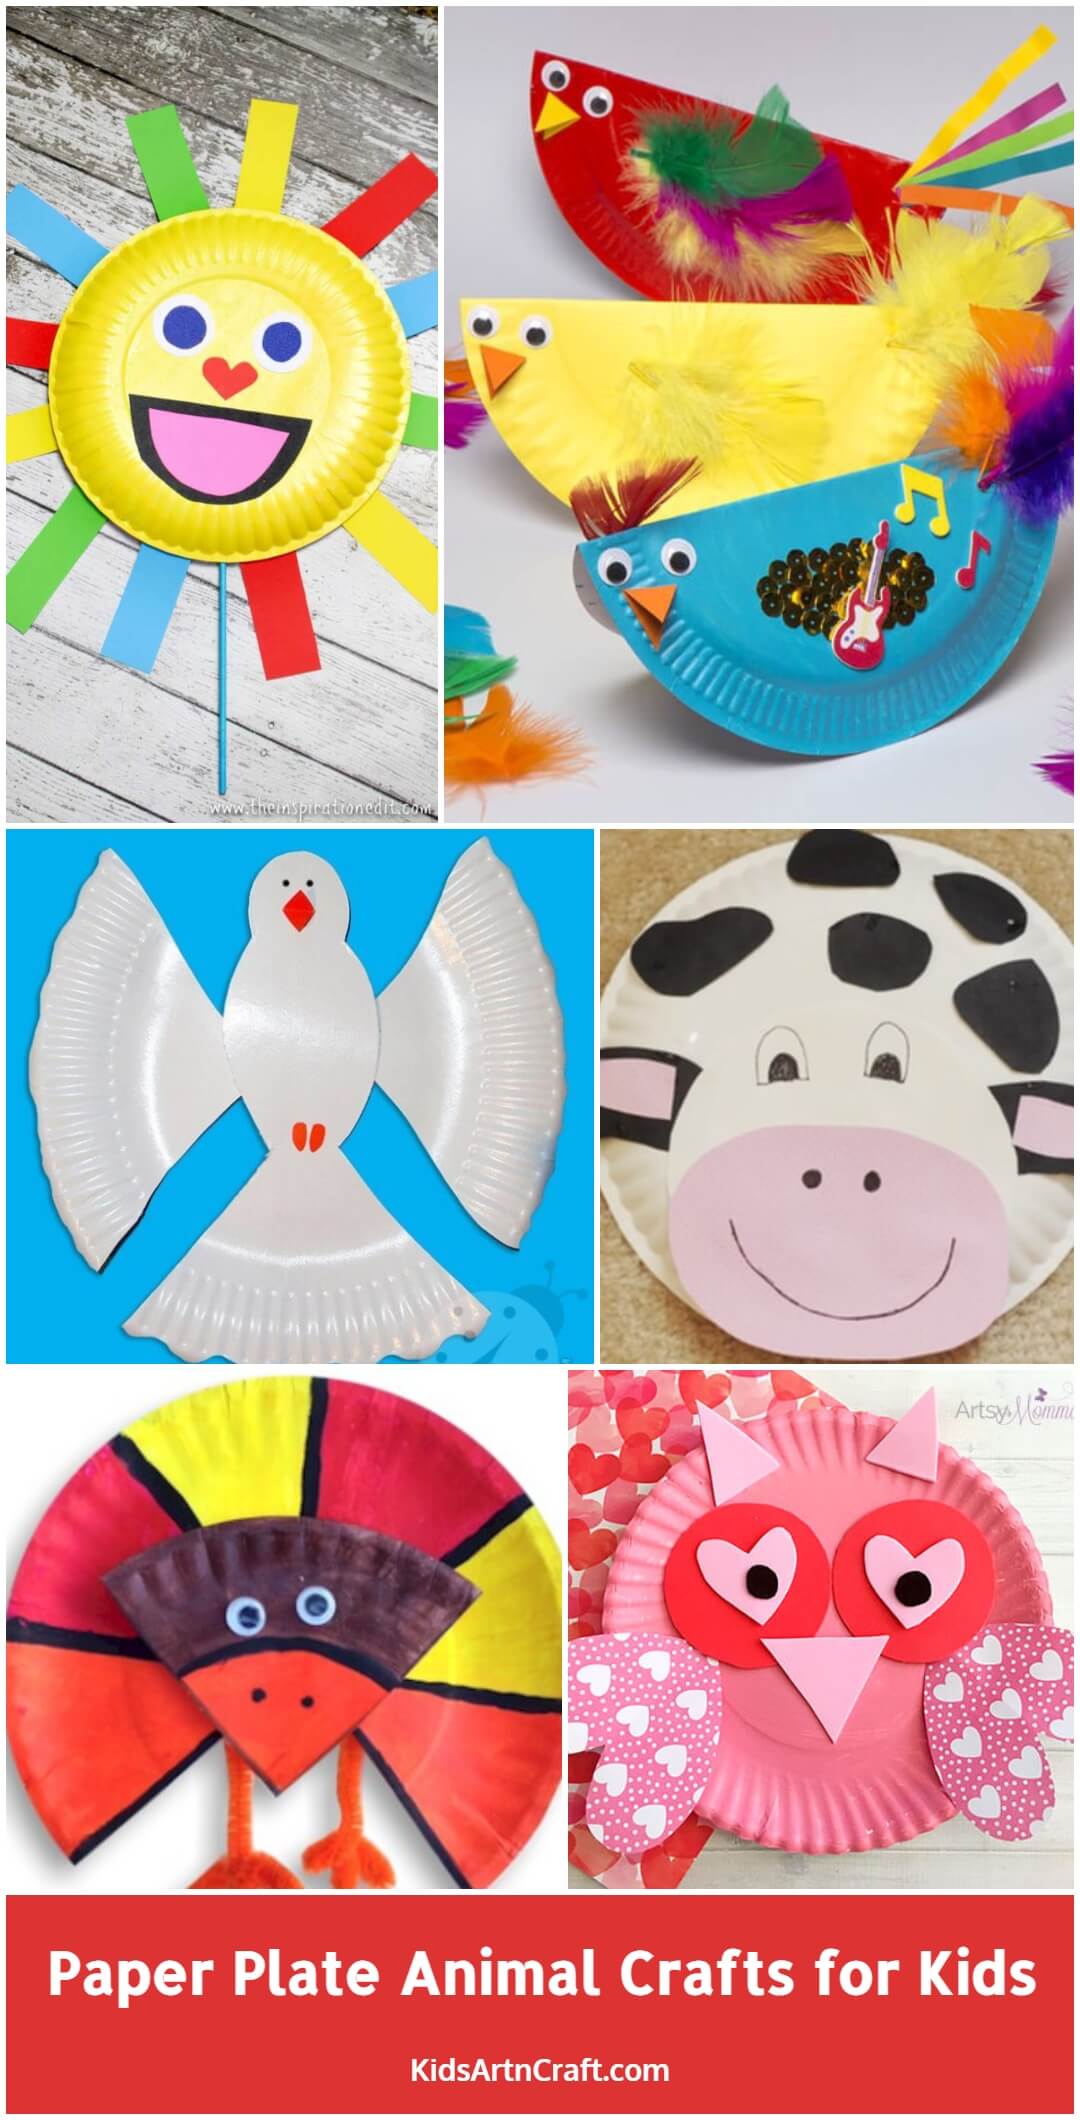 Paper Plate Animal Crafts for Kids